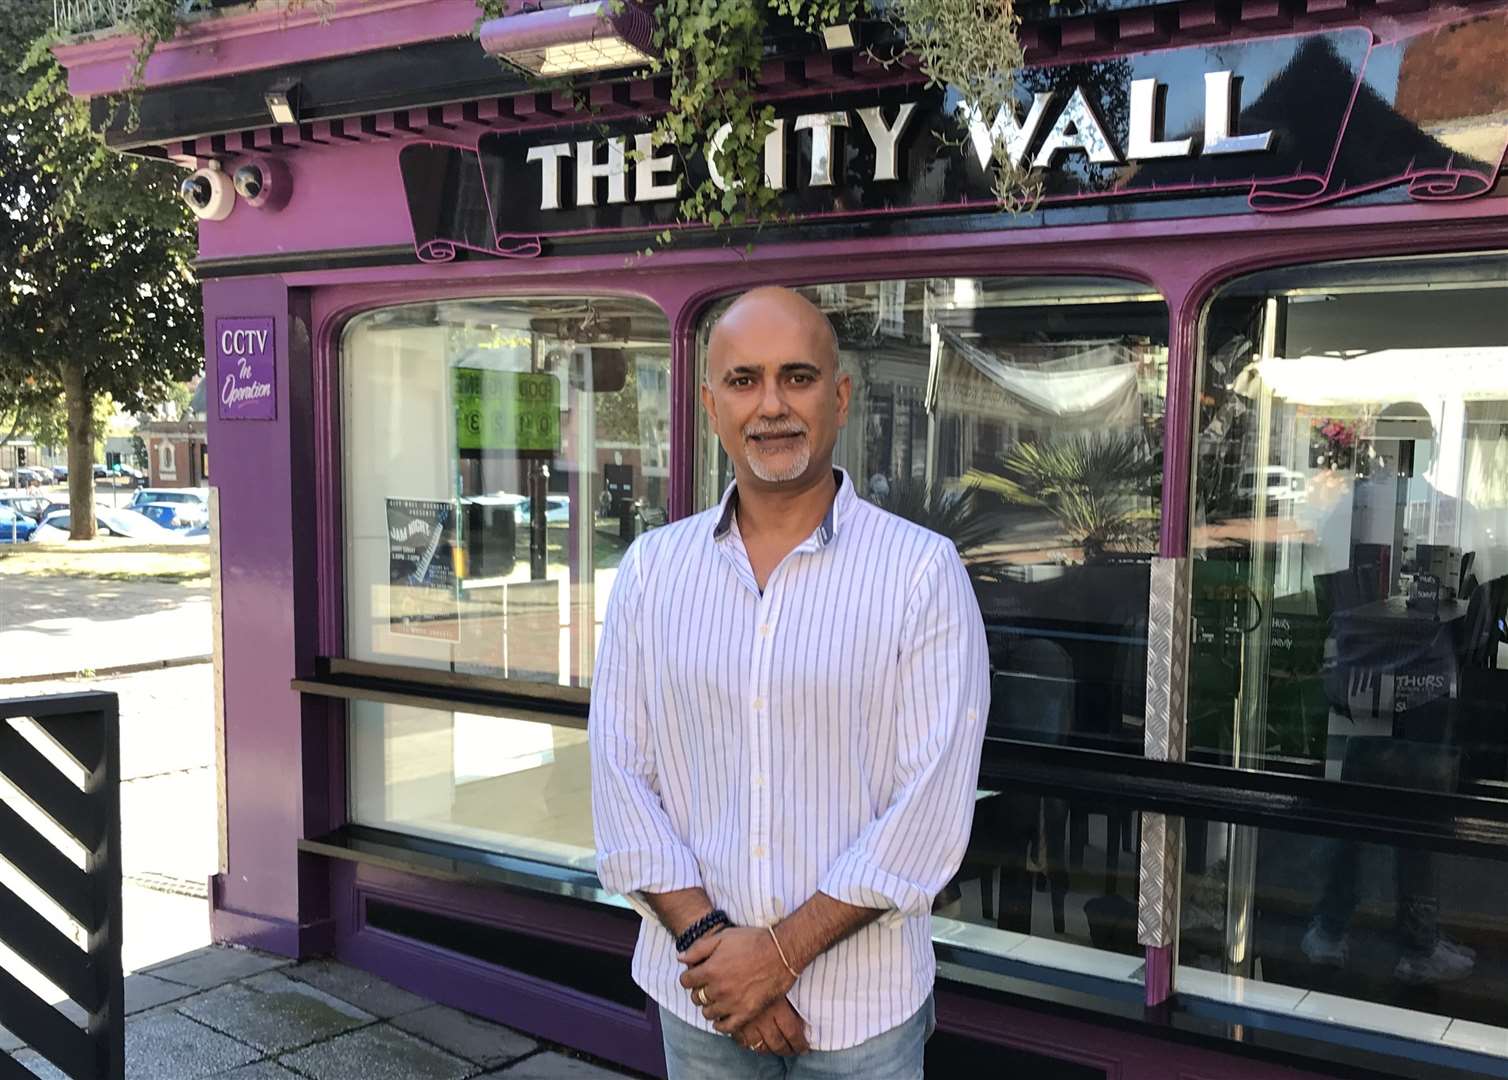 Sanjay Raval is leaving the City Wall Wine Bar